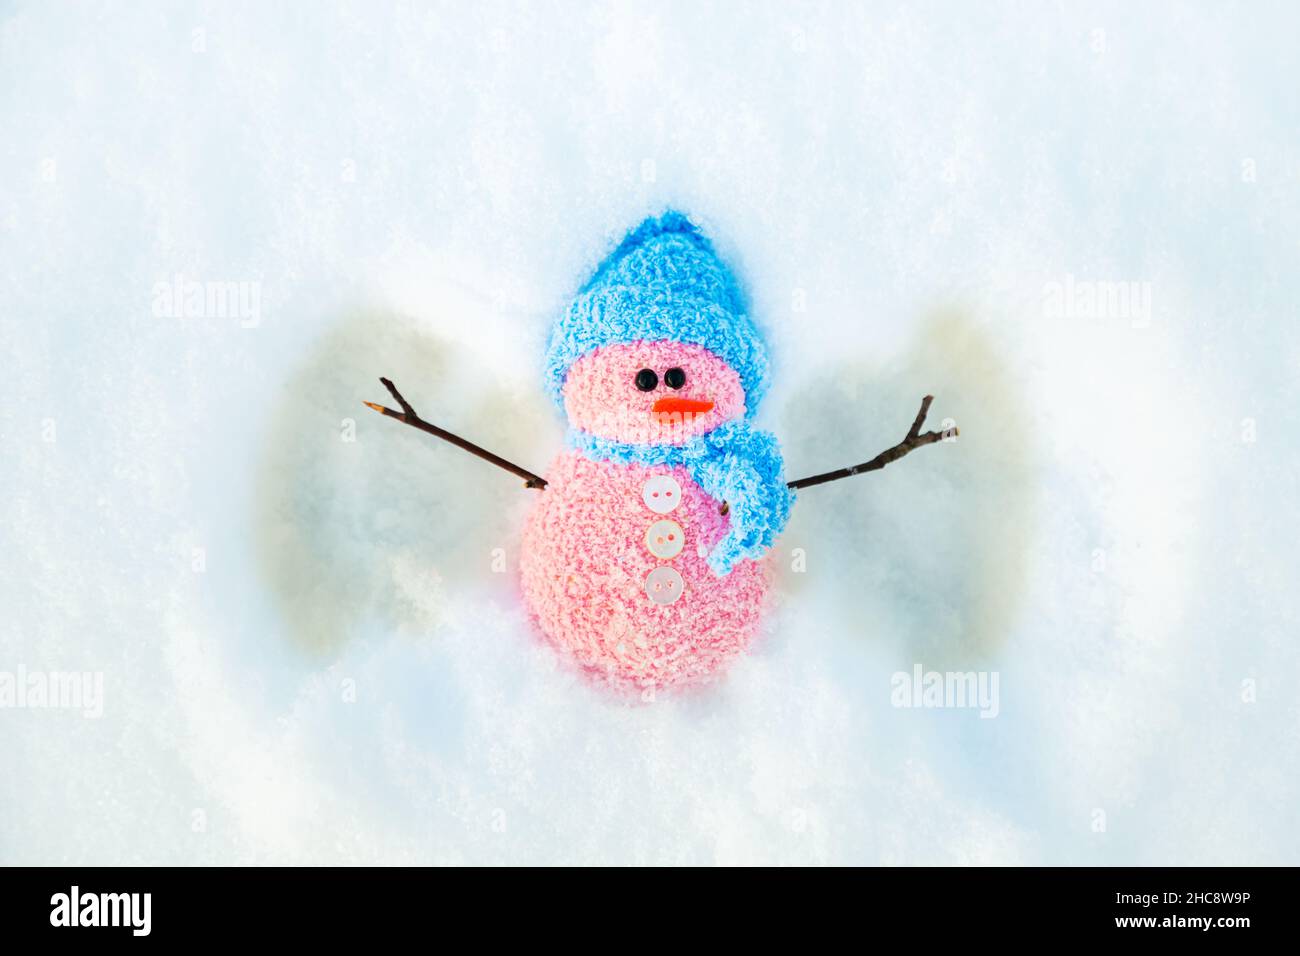 Cute snowman makes a snow angel. Winter background with copy space. Stock Photo